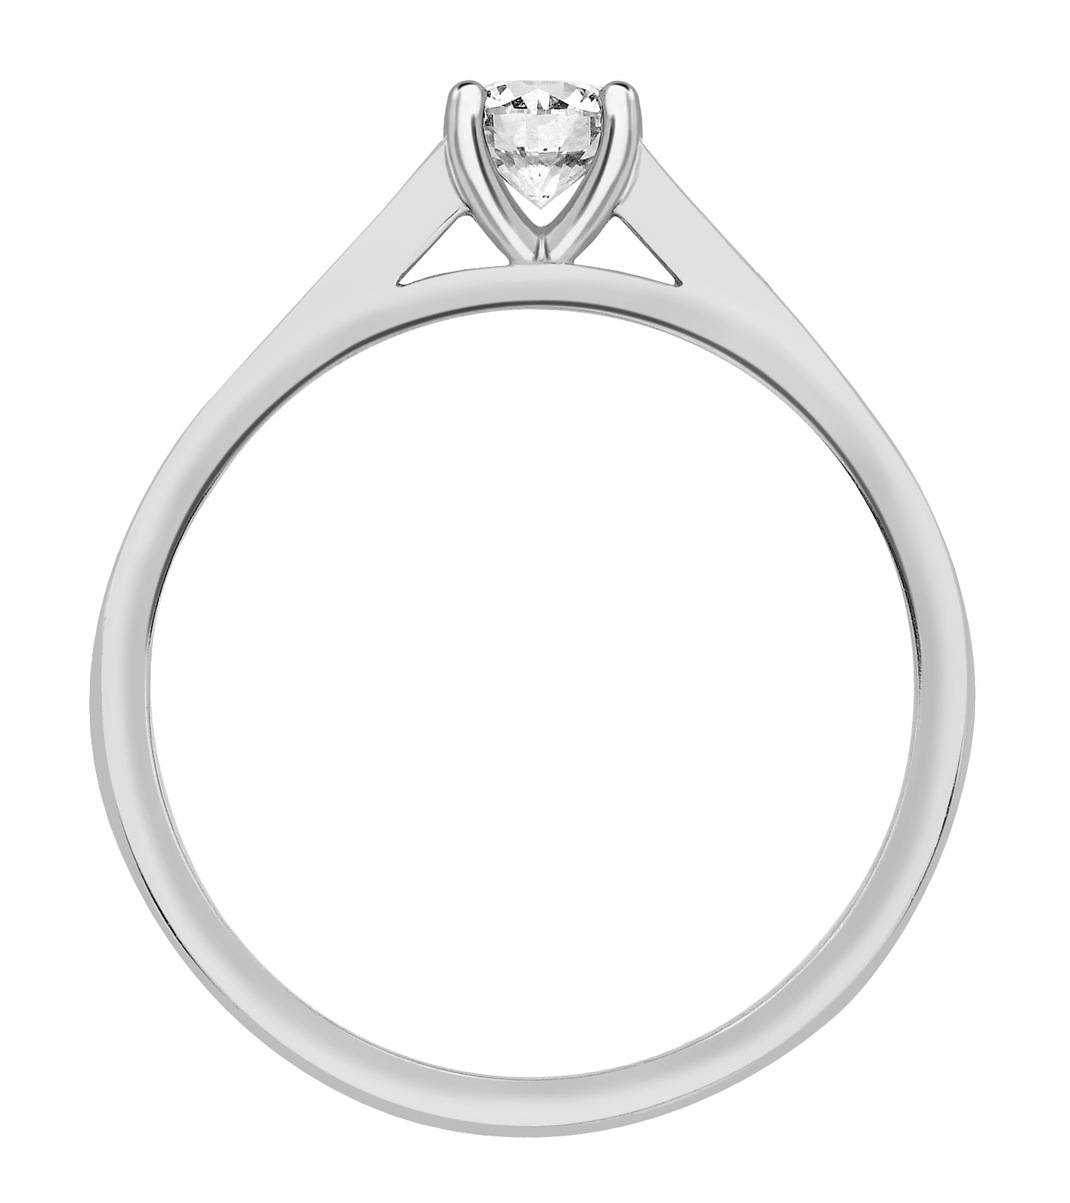 Round Four Claw White Gold Channel Set Engagement Ring CRC739 Image 2